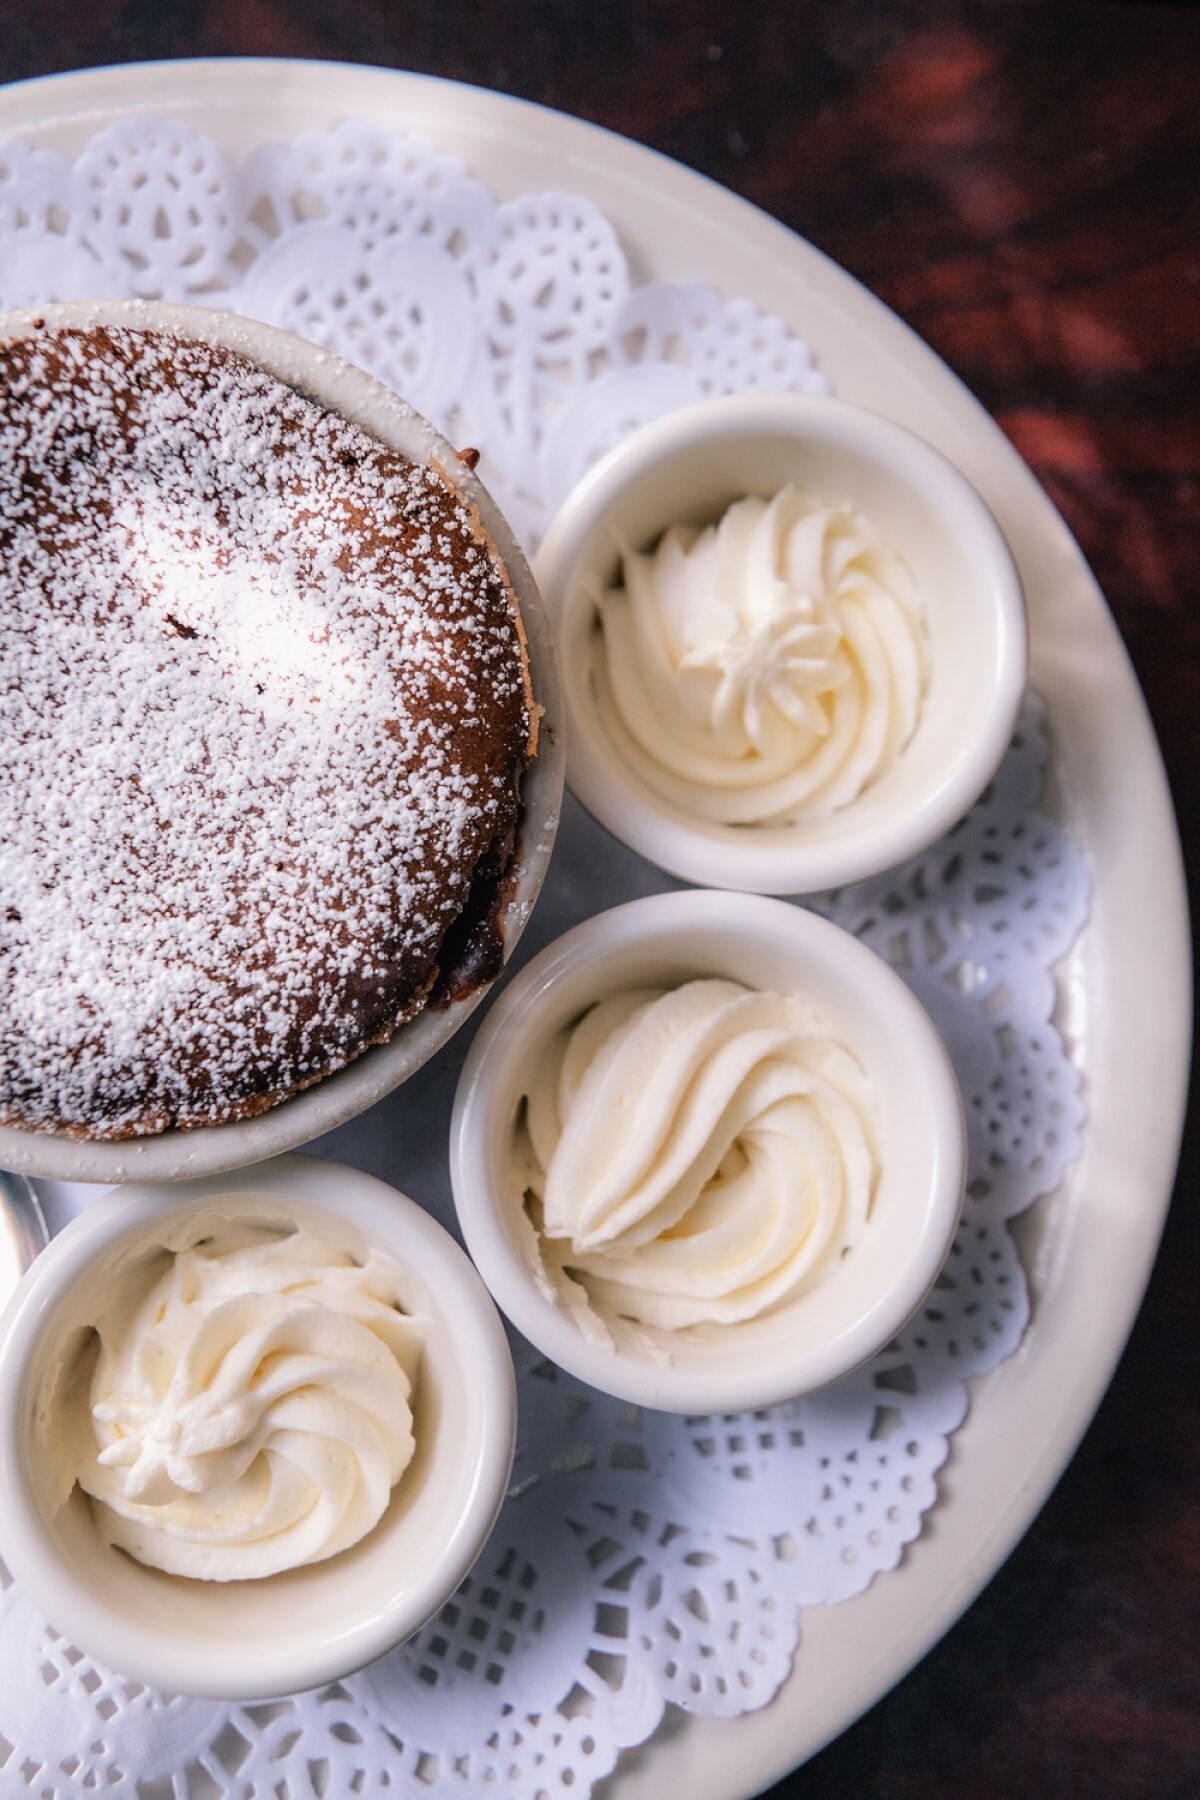 A plate holds a souffle and small cups of whipped cream.